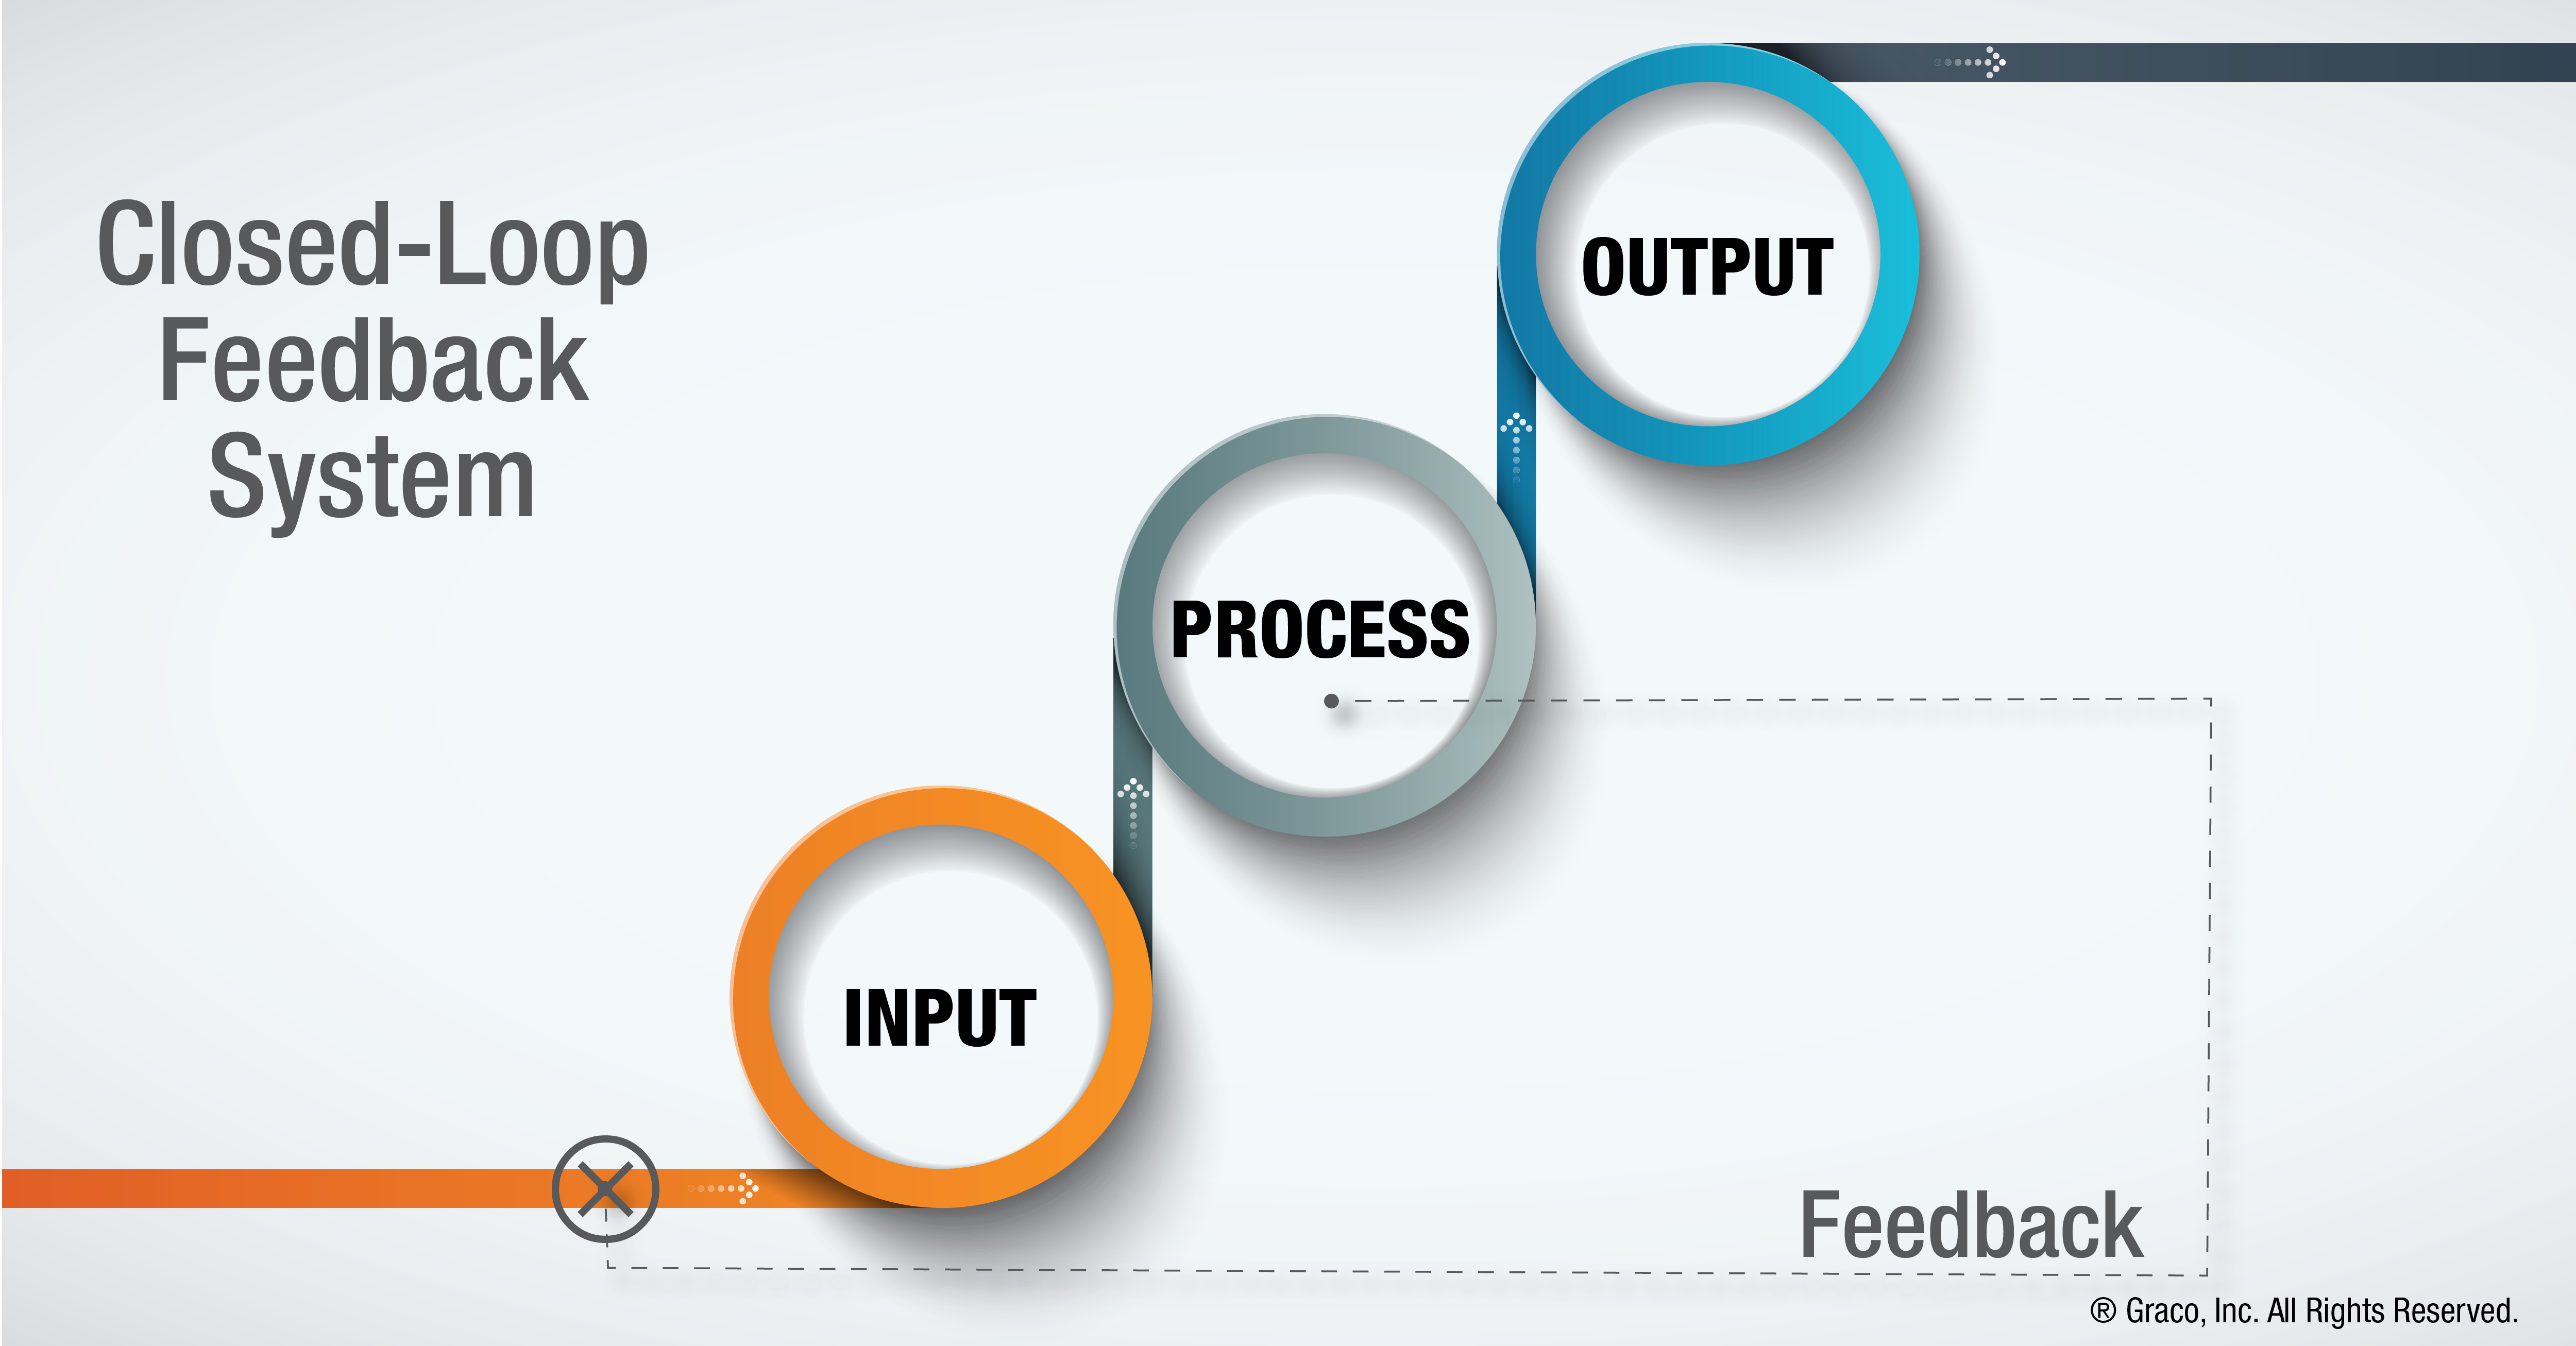 Infographic shows the closed-loop feedback system cycle that starts with input then process that loops back to inform input.